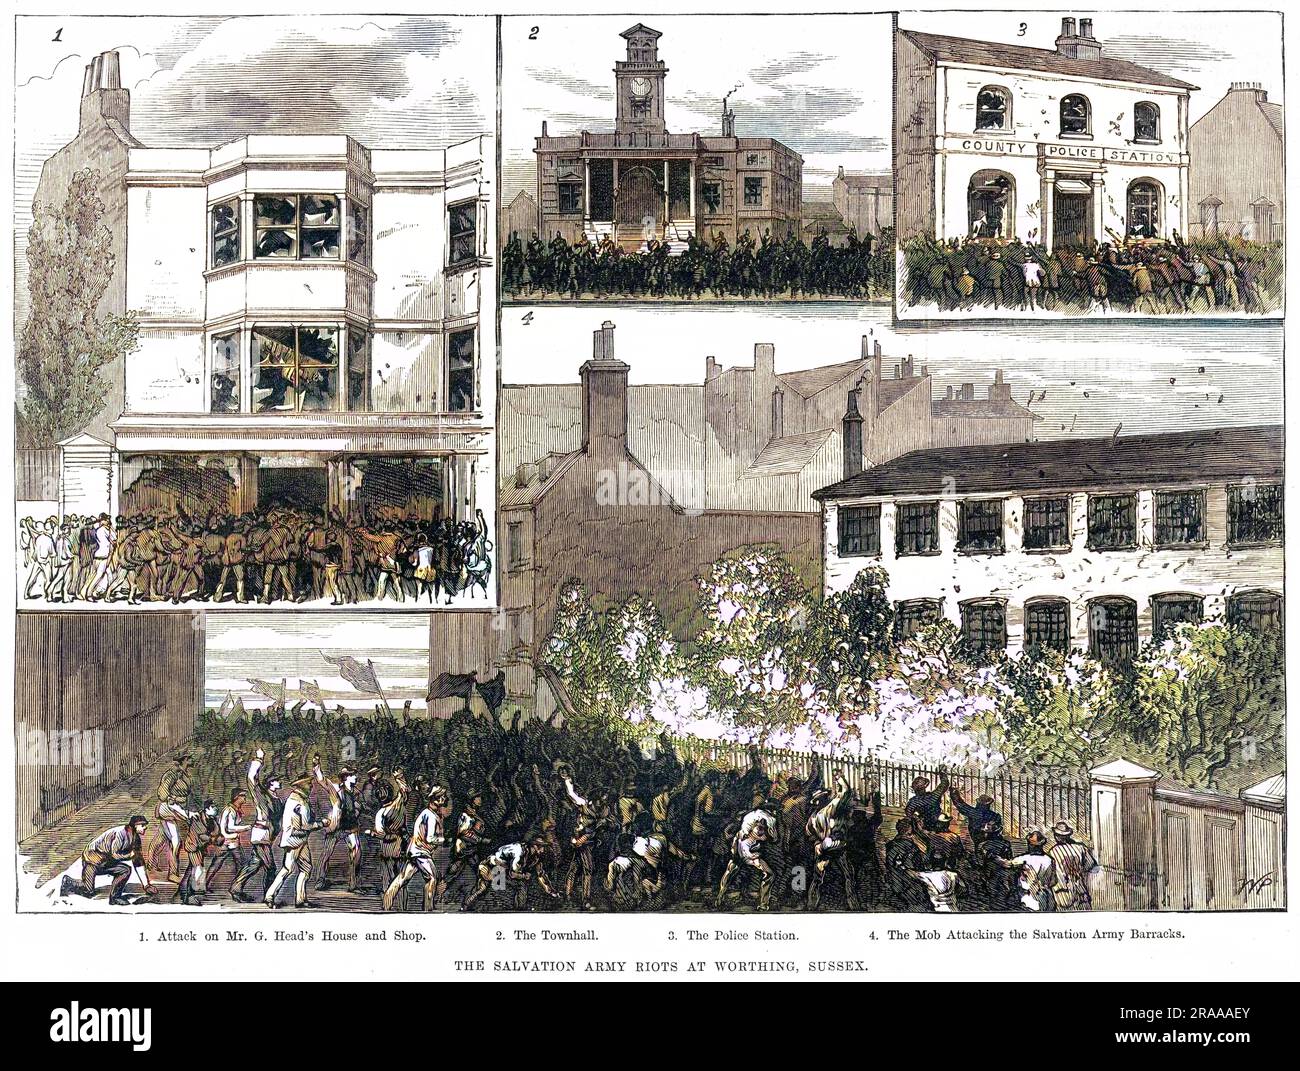 These images show the 'Skeleton Army', opponents of the Salvation Army organised by 'those interested in Sunday drinking', rioting against one of the Salvation Army's religious Sunday processions. The members of the Salvation Army escaped into Montague Hall and hid there for the rest of the day.  1. Attack on Mr. G. Head's house and shop. 2. The Townhall 3. The Police Station 4. The mob attacking the Salvation Army Barracks.     Date: 1884 Stock Photo